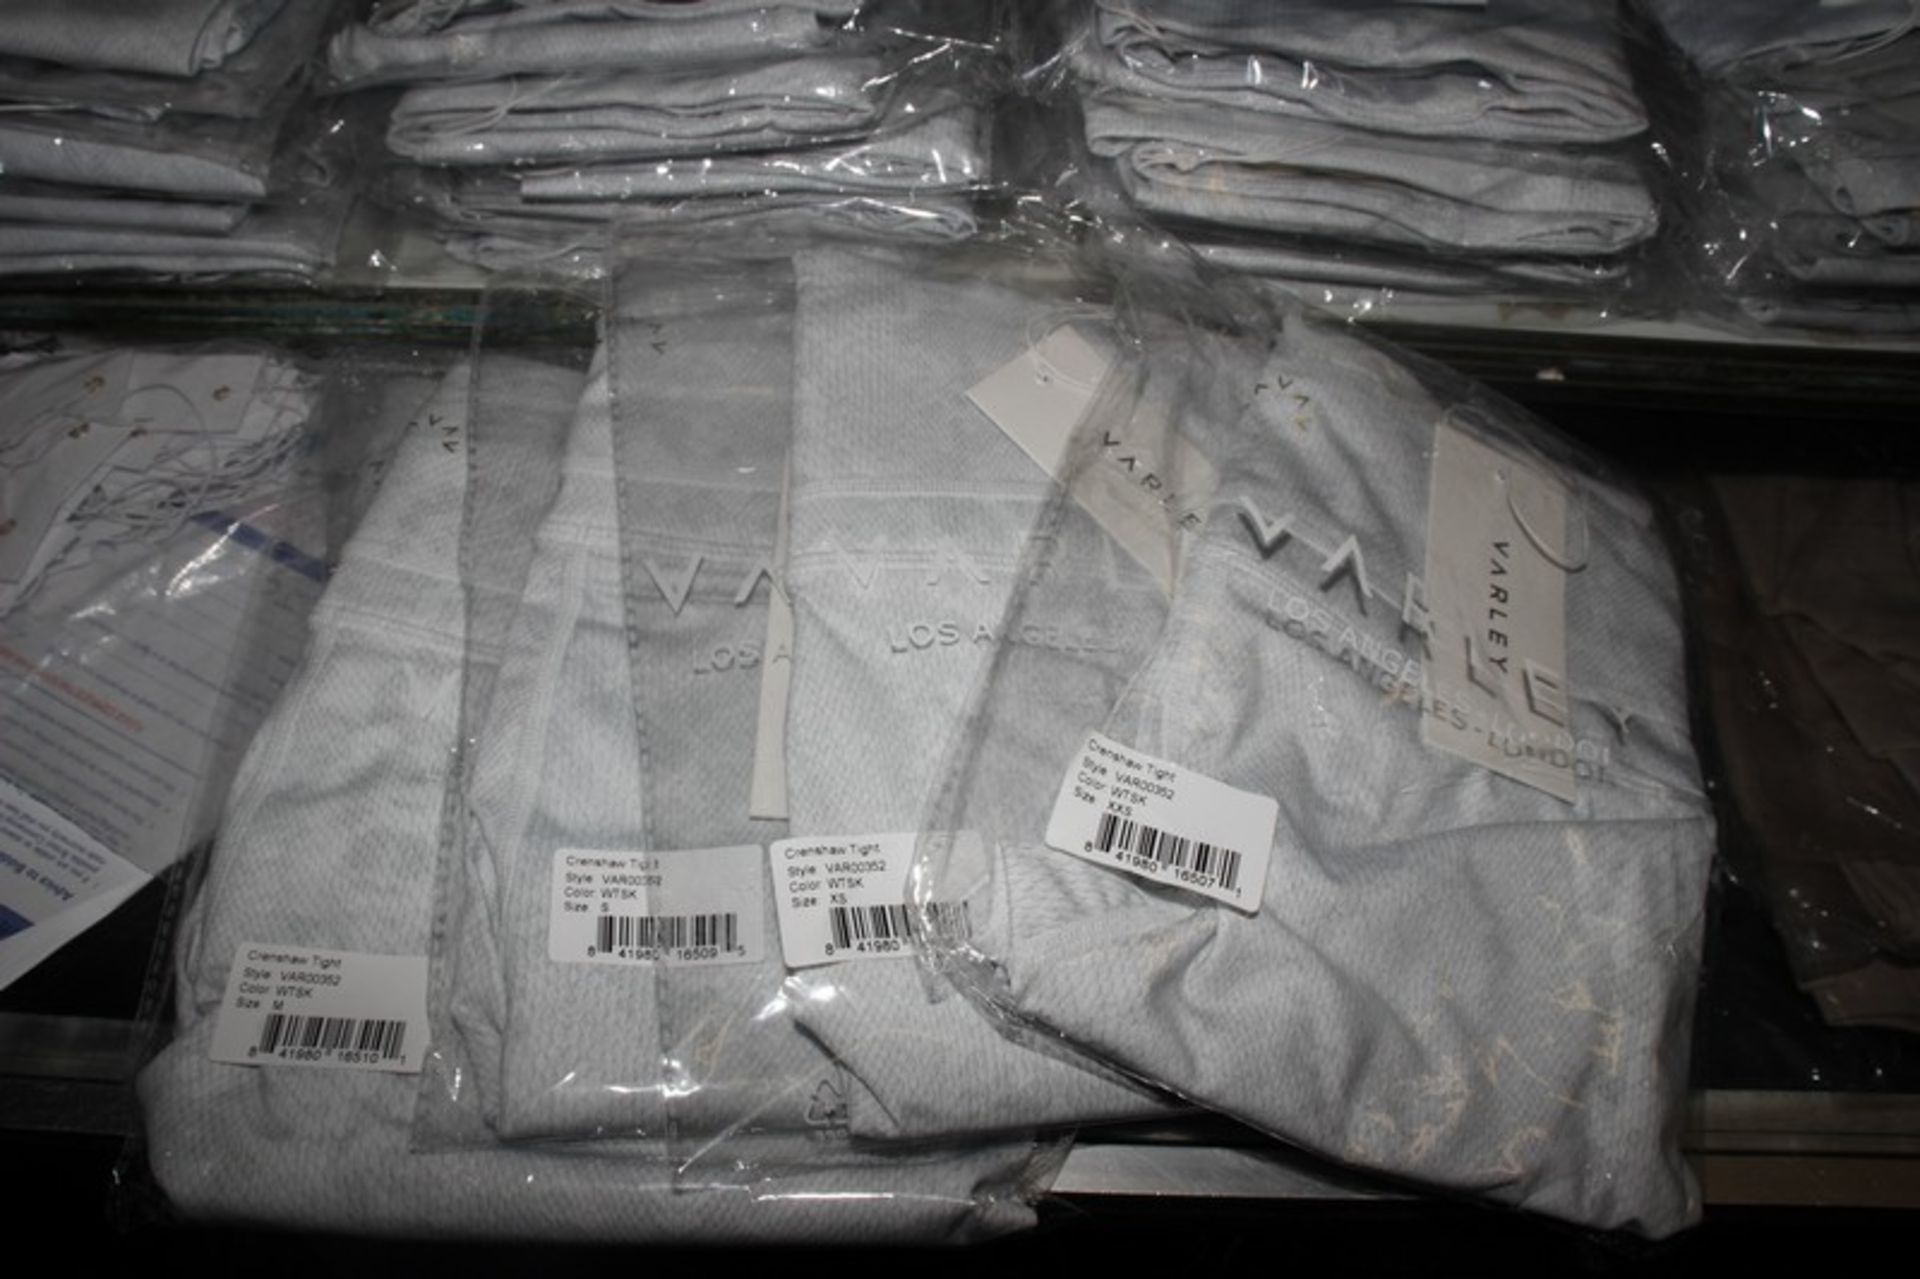 Five pairs of Varley Crenshaw ankle tights/leggings (Assorted sizes).